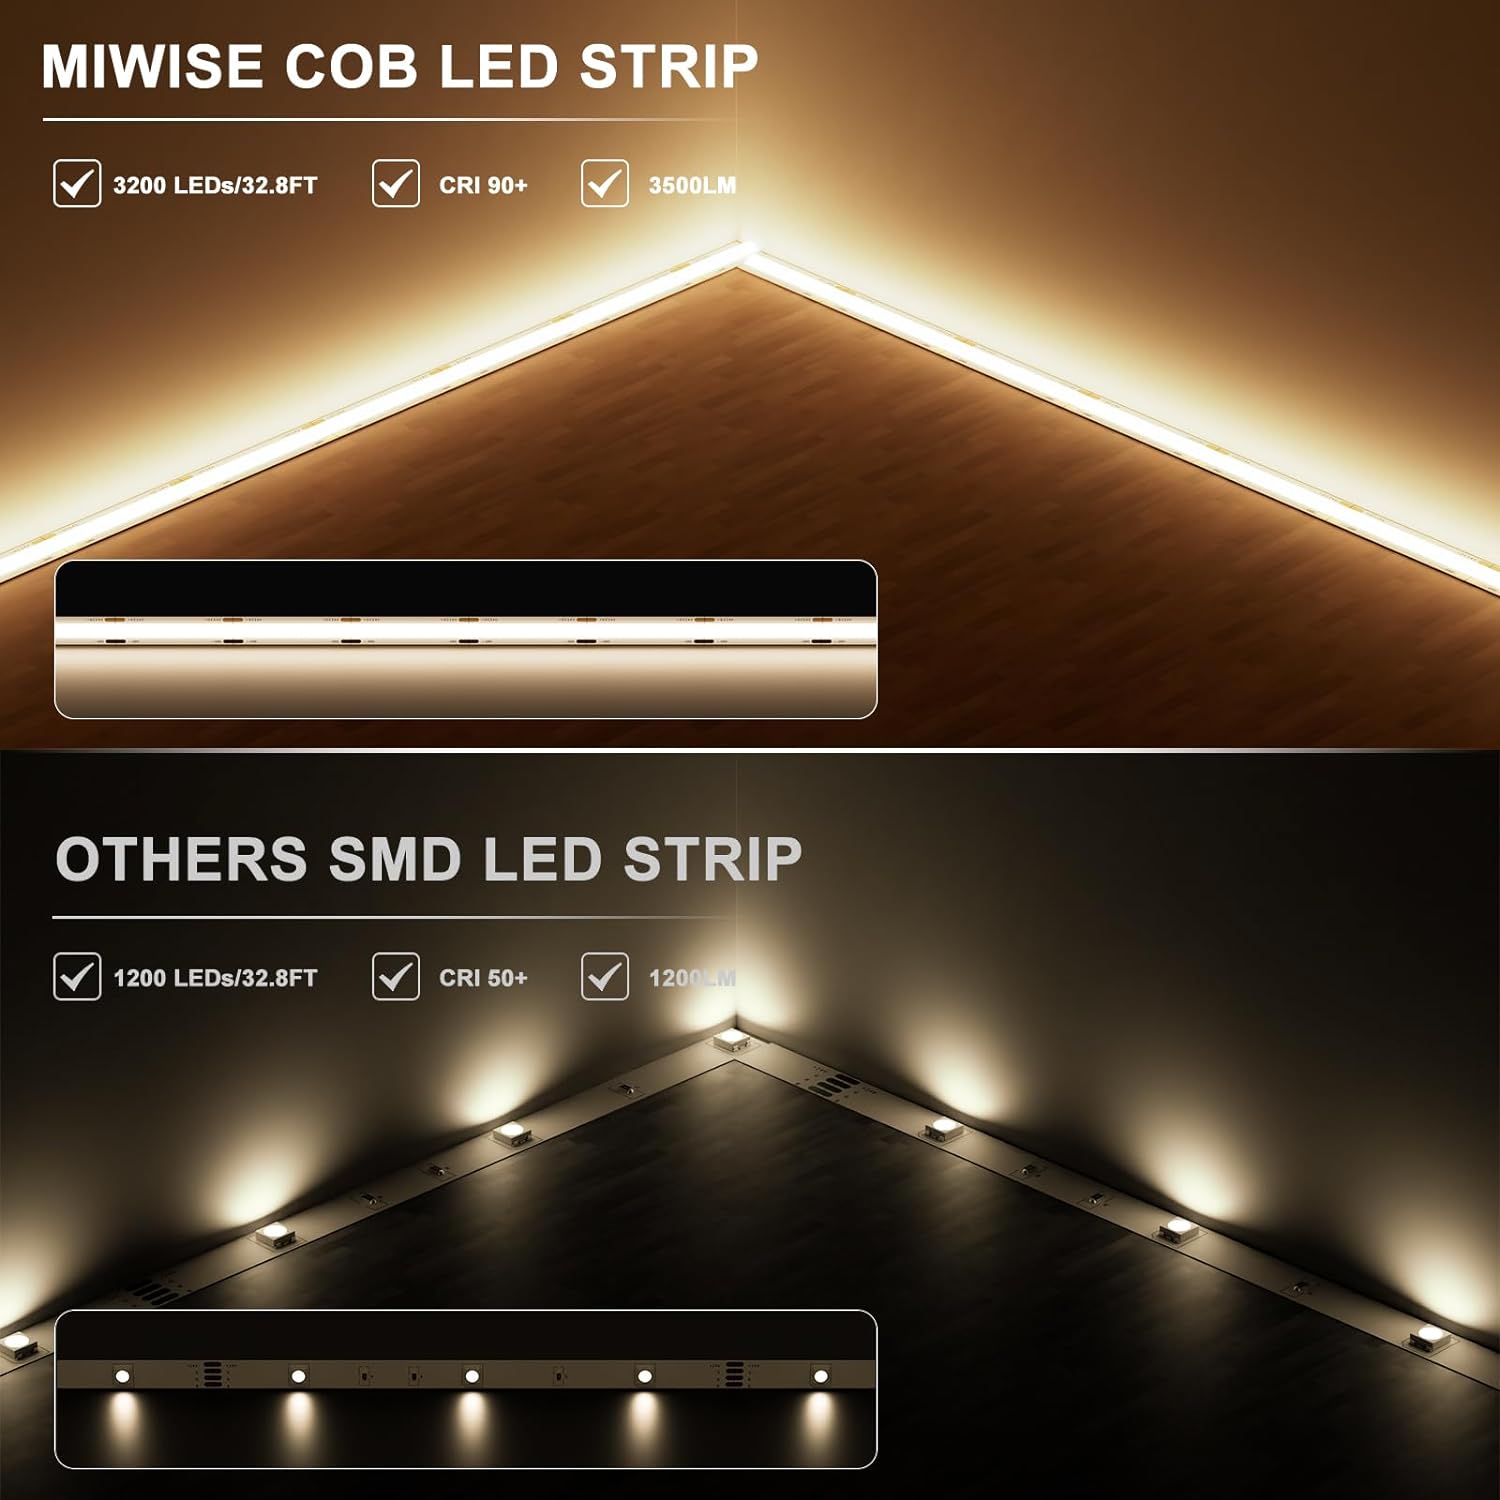 MIWISE COB LED Strip 32.8ft/10m,CRI 90+ Warm White 3000K High Lumen Super Bright Flexible DC24V LED Tape Light,for Cabinet Home Office DIY Lighting Projects(AdapterController NOT Included)